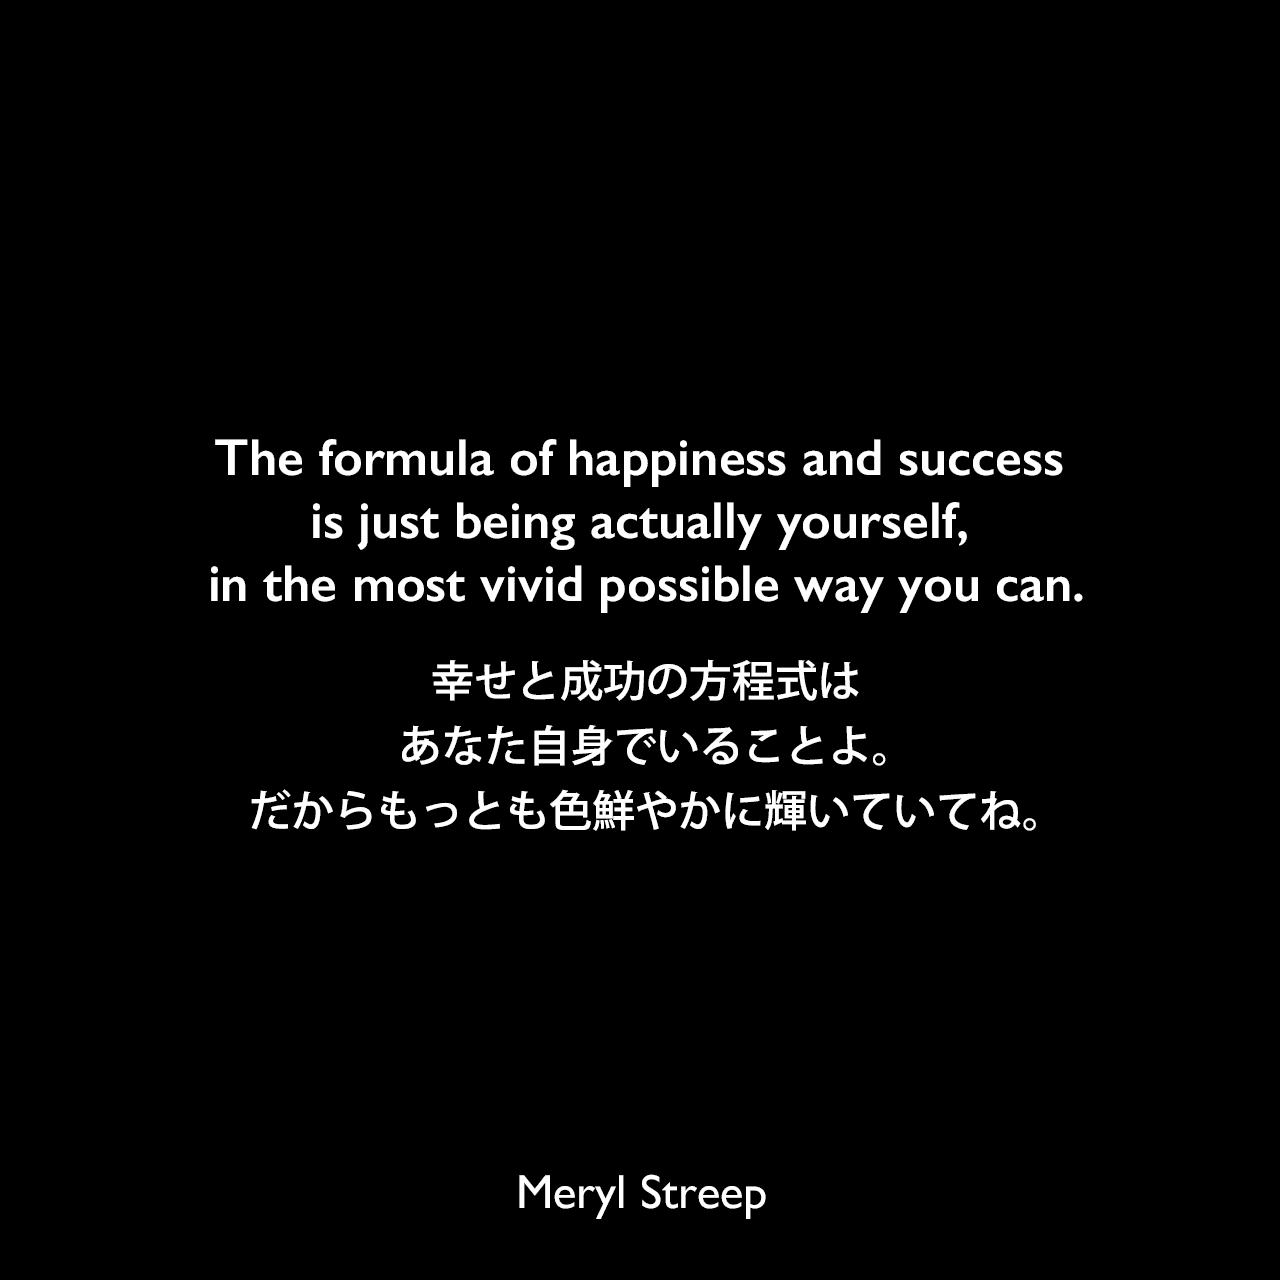 The formula of happiness and success is just being actually yourself, in the most vivid possible way you can.幸せと成功の方程式は、あなた自身でいることよ。だからもっとも色鮮やかに輝いていてね。Meryl Streep